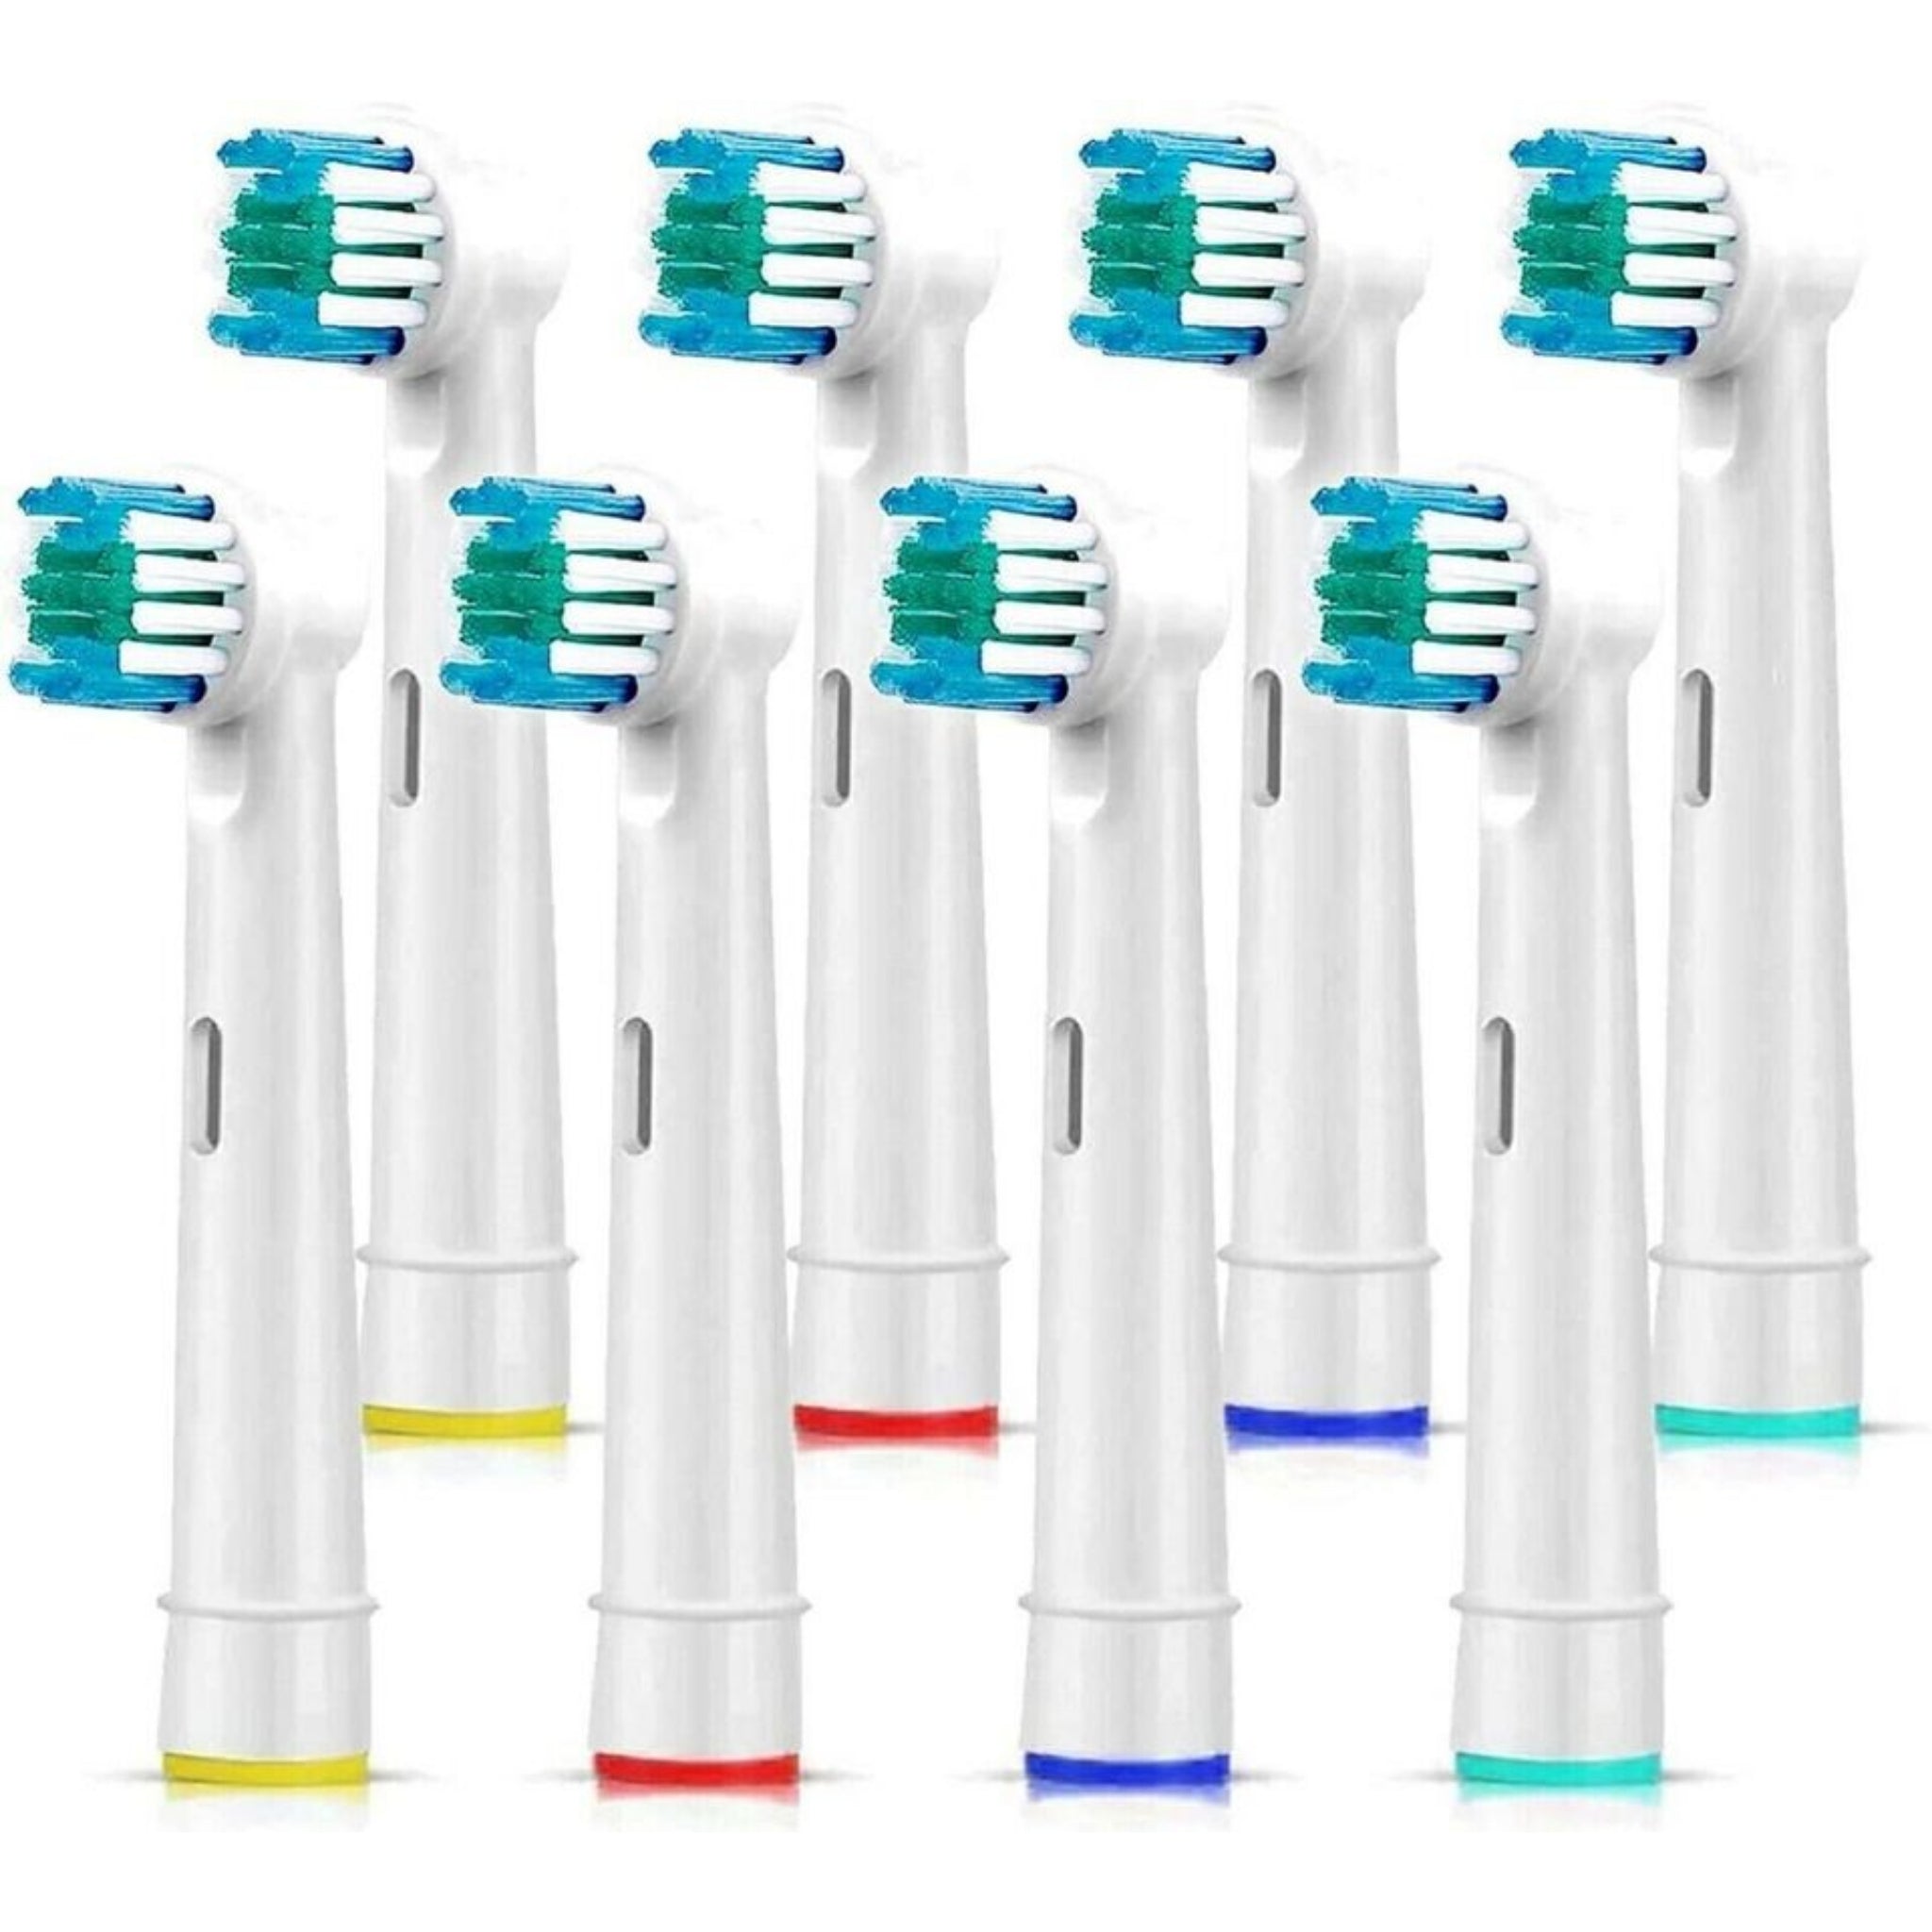 Beclen Harp 20 Electric Toothbrush Heads Compatible With Oral B Braun Replacement brush Head